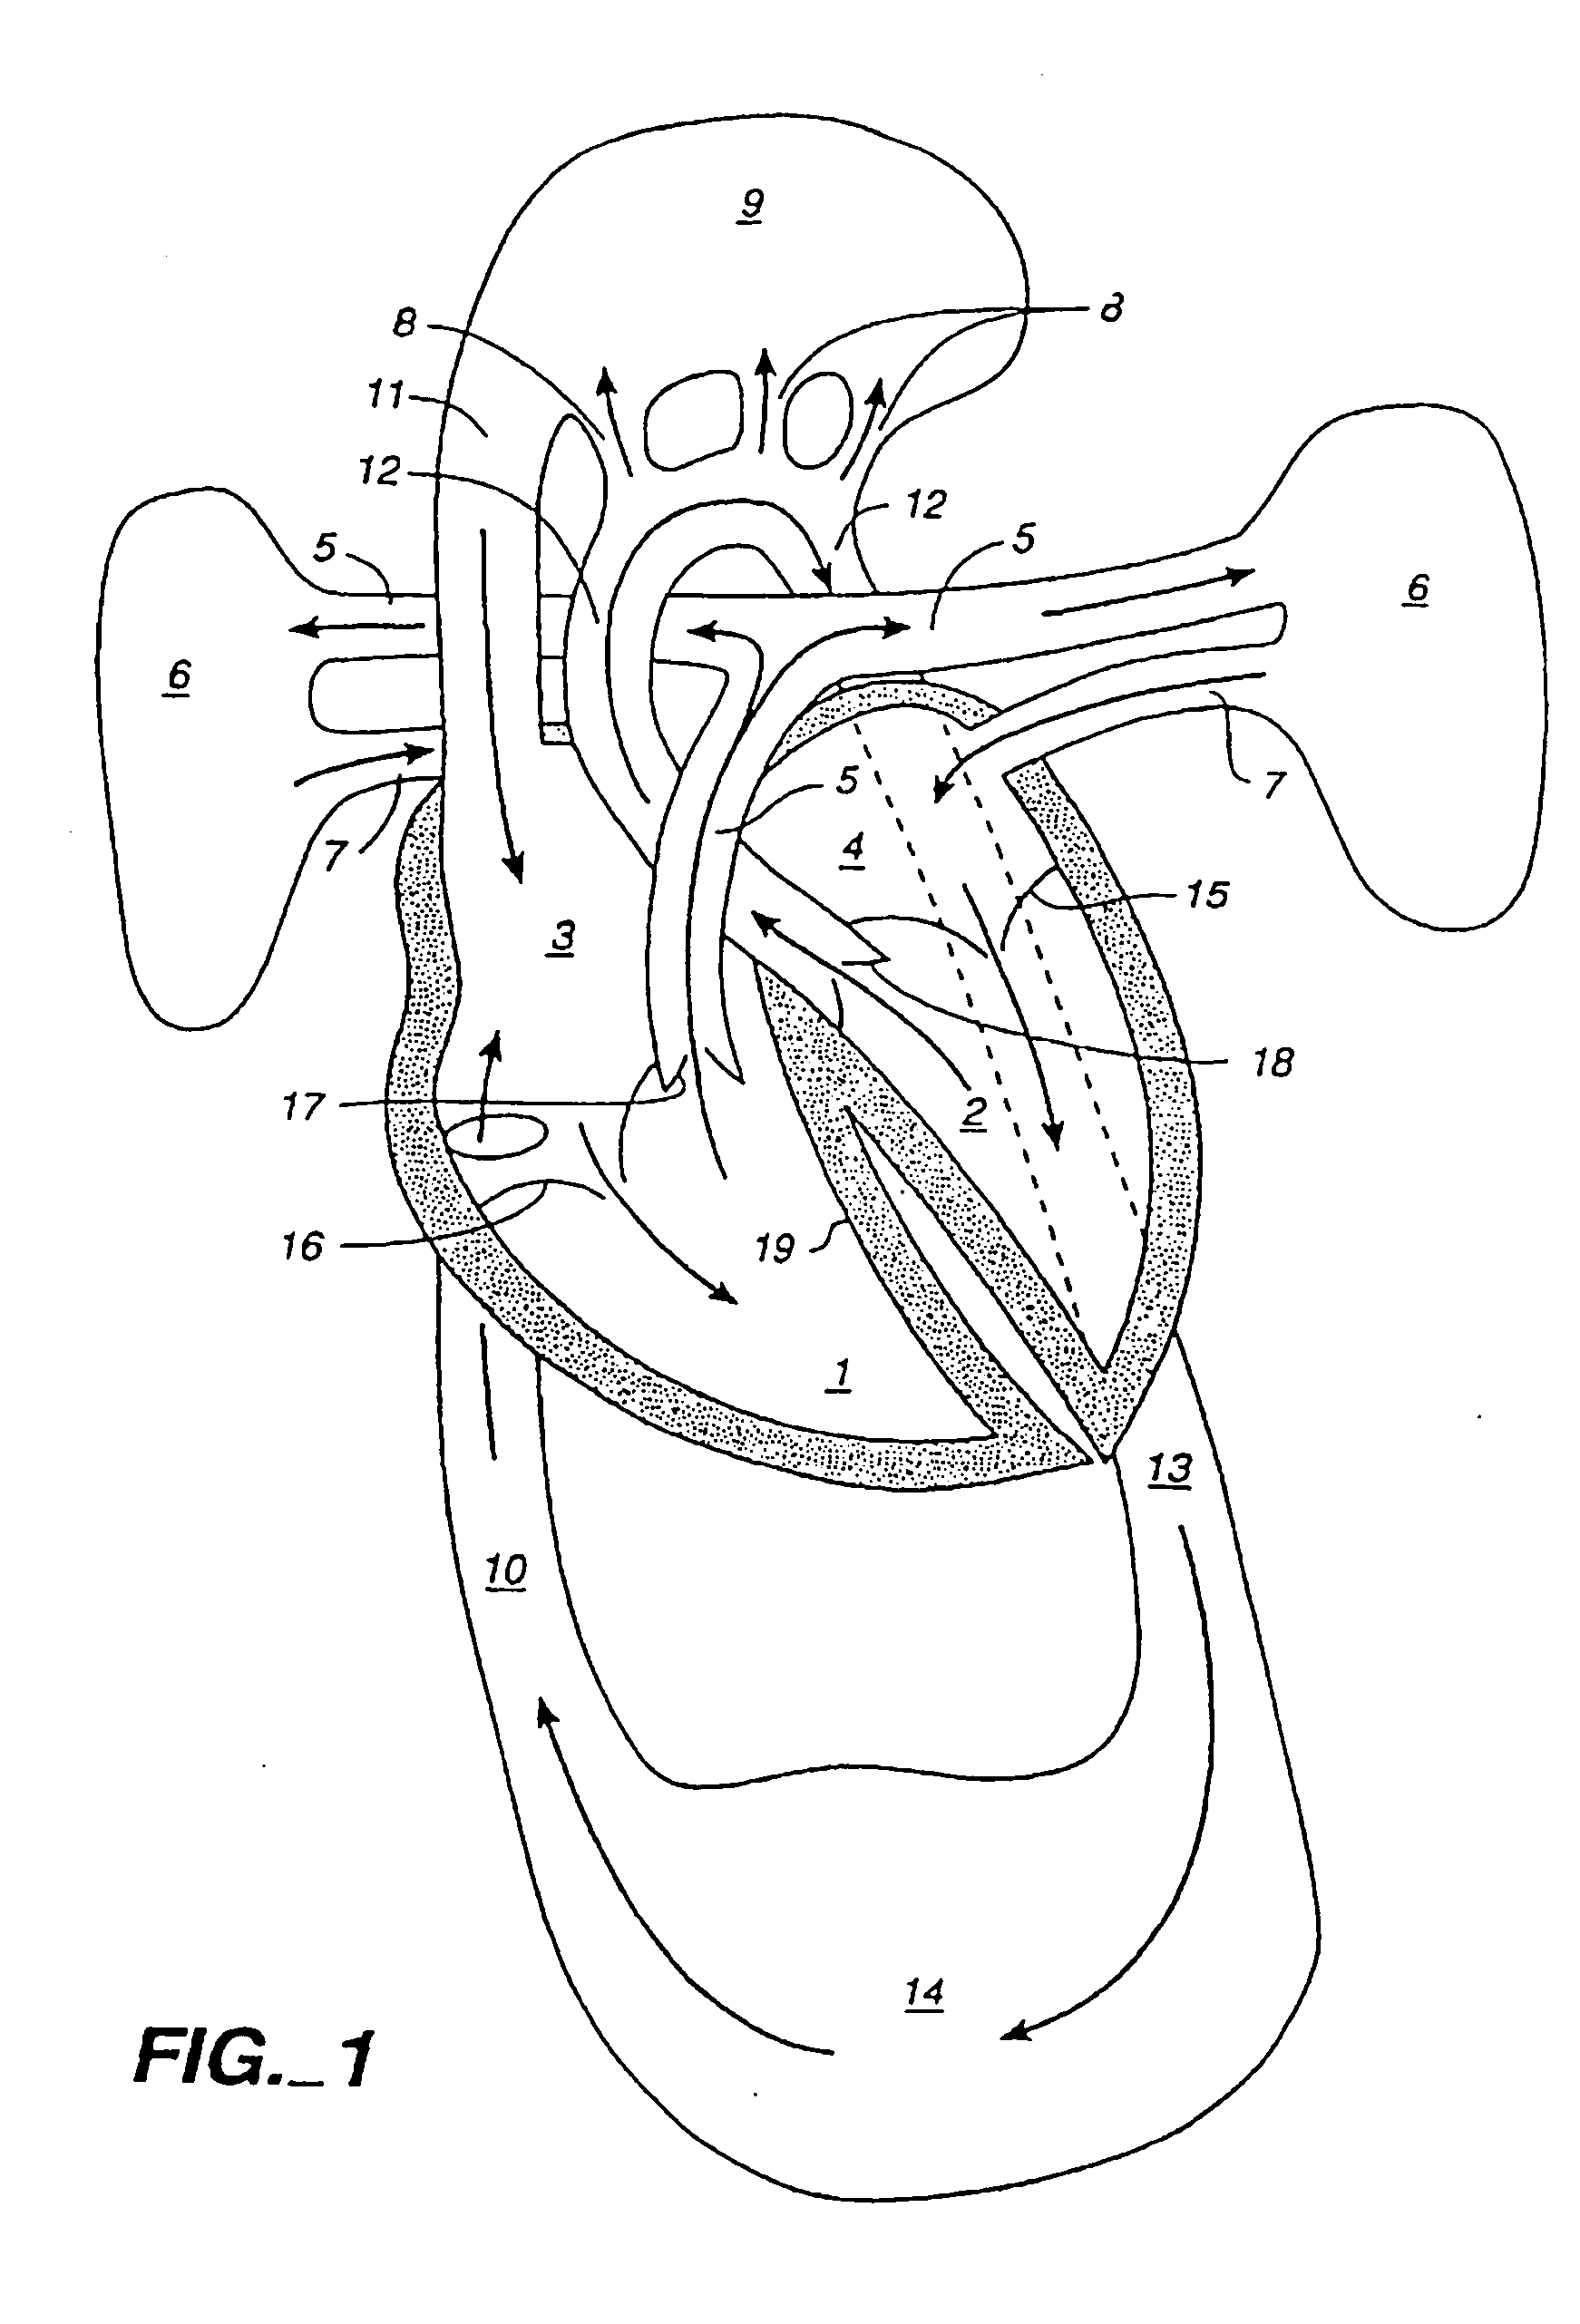 Venous cannula and cardiopulmonary bypass system